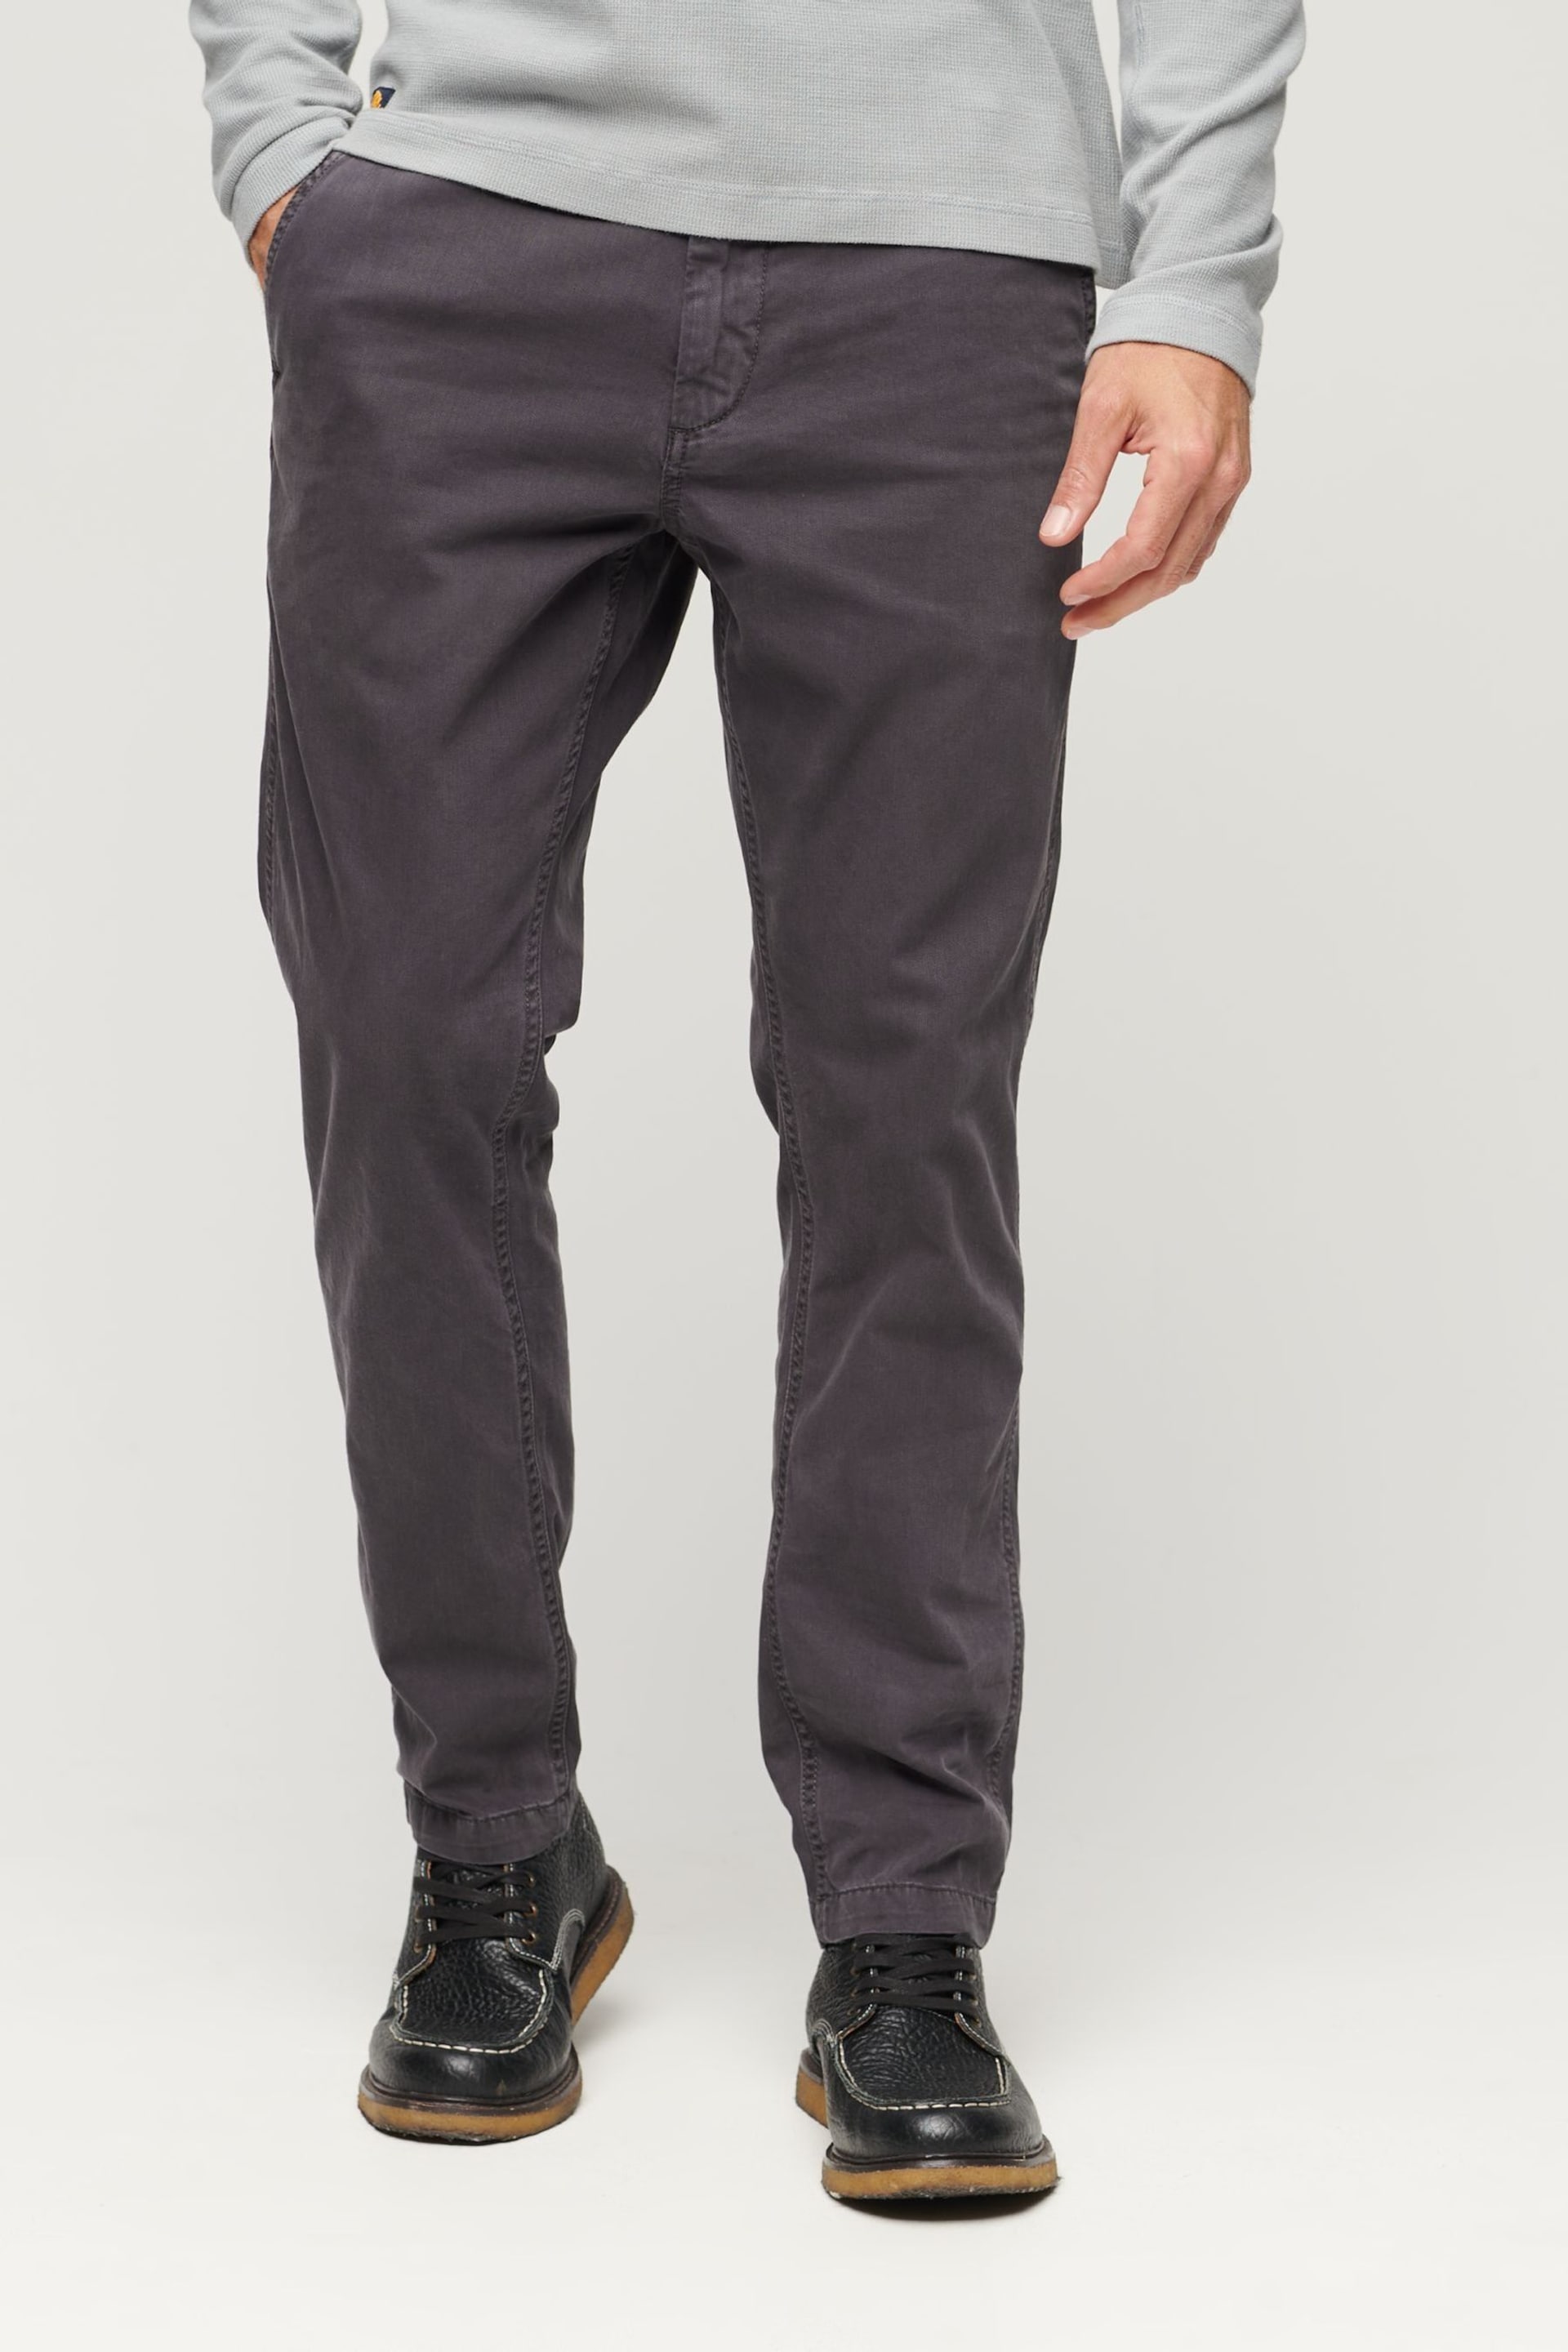 Superdry Grey Slim Officers Chinos Trousers - Image 1 of 7